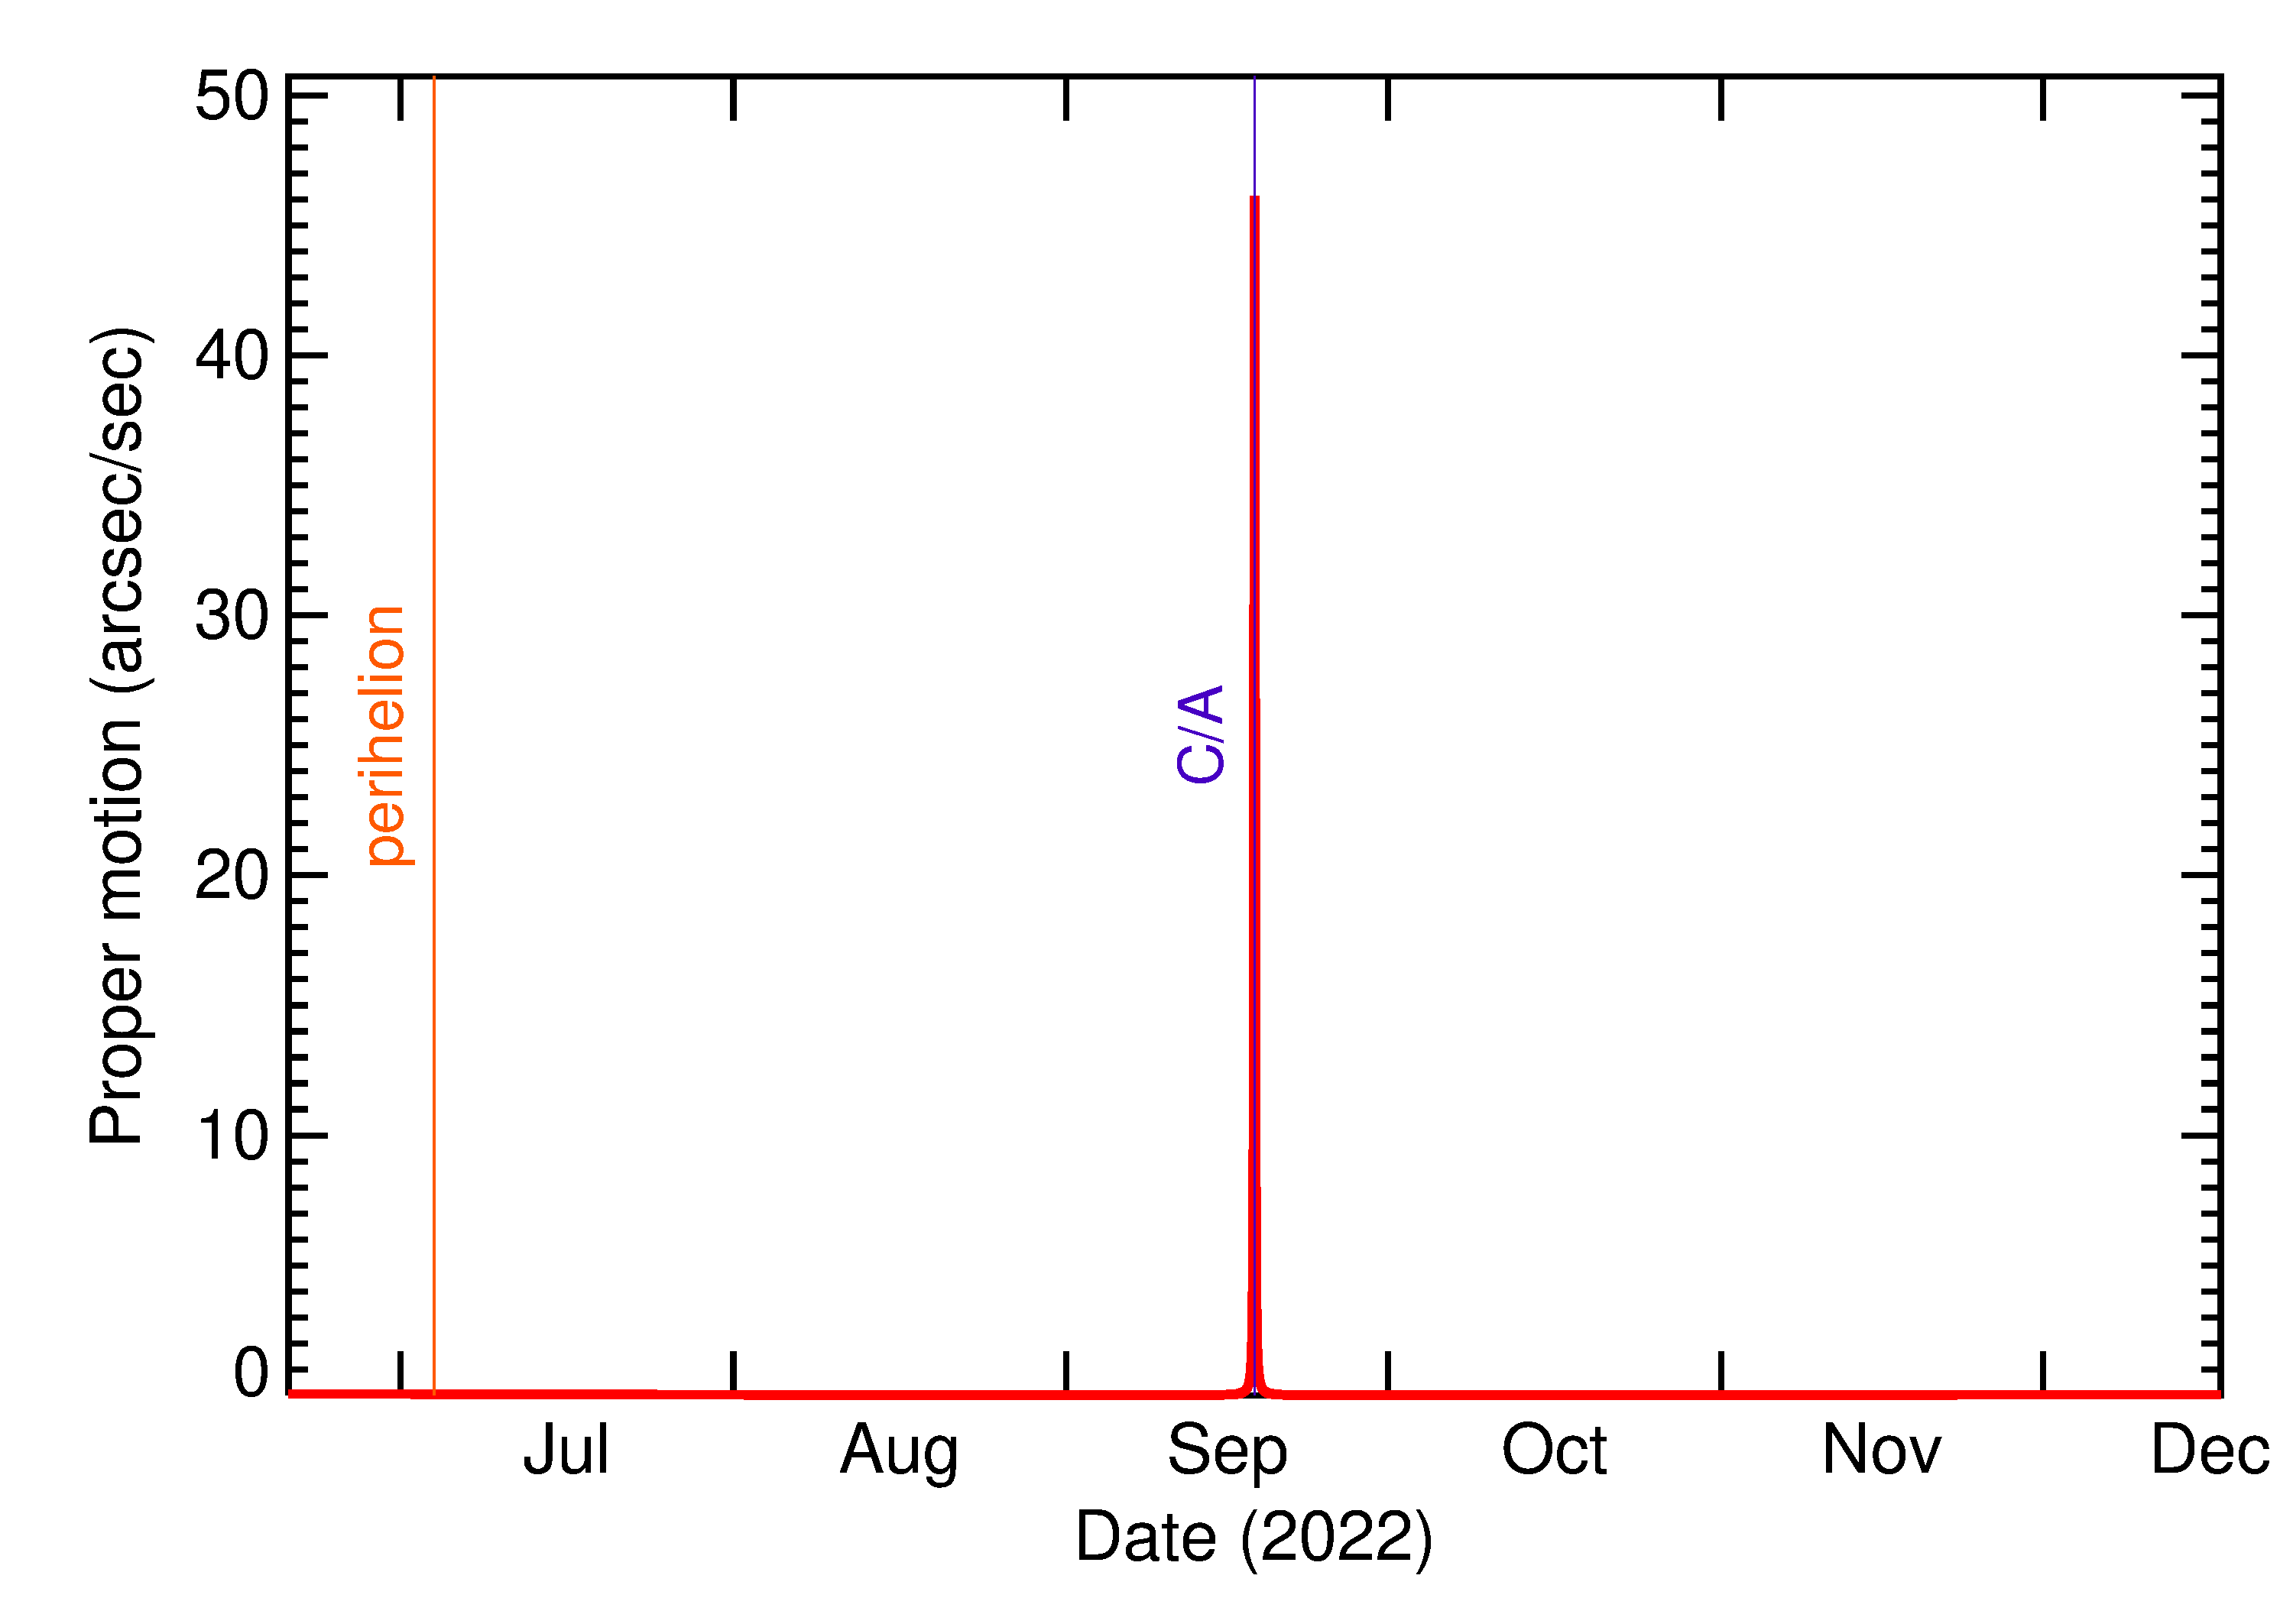 Proper motion rate of 2022 SX55 in the months around closest approach